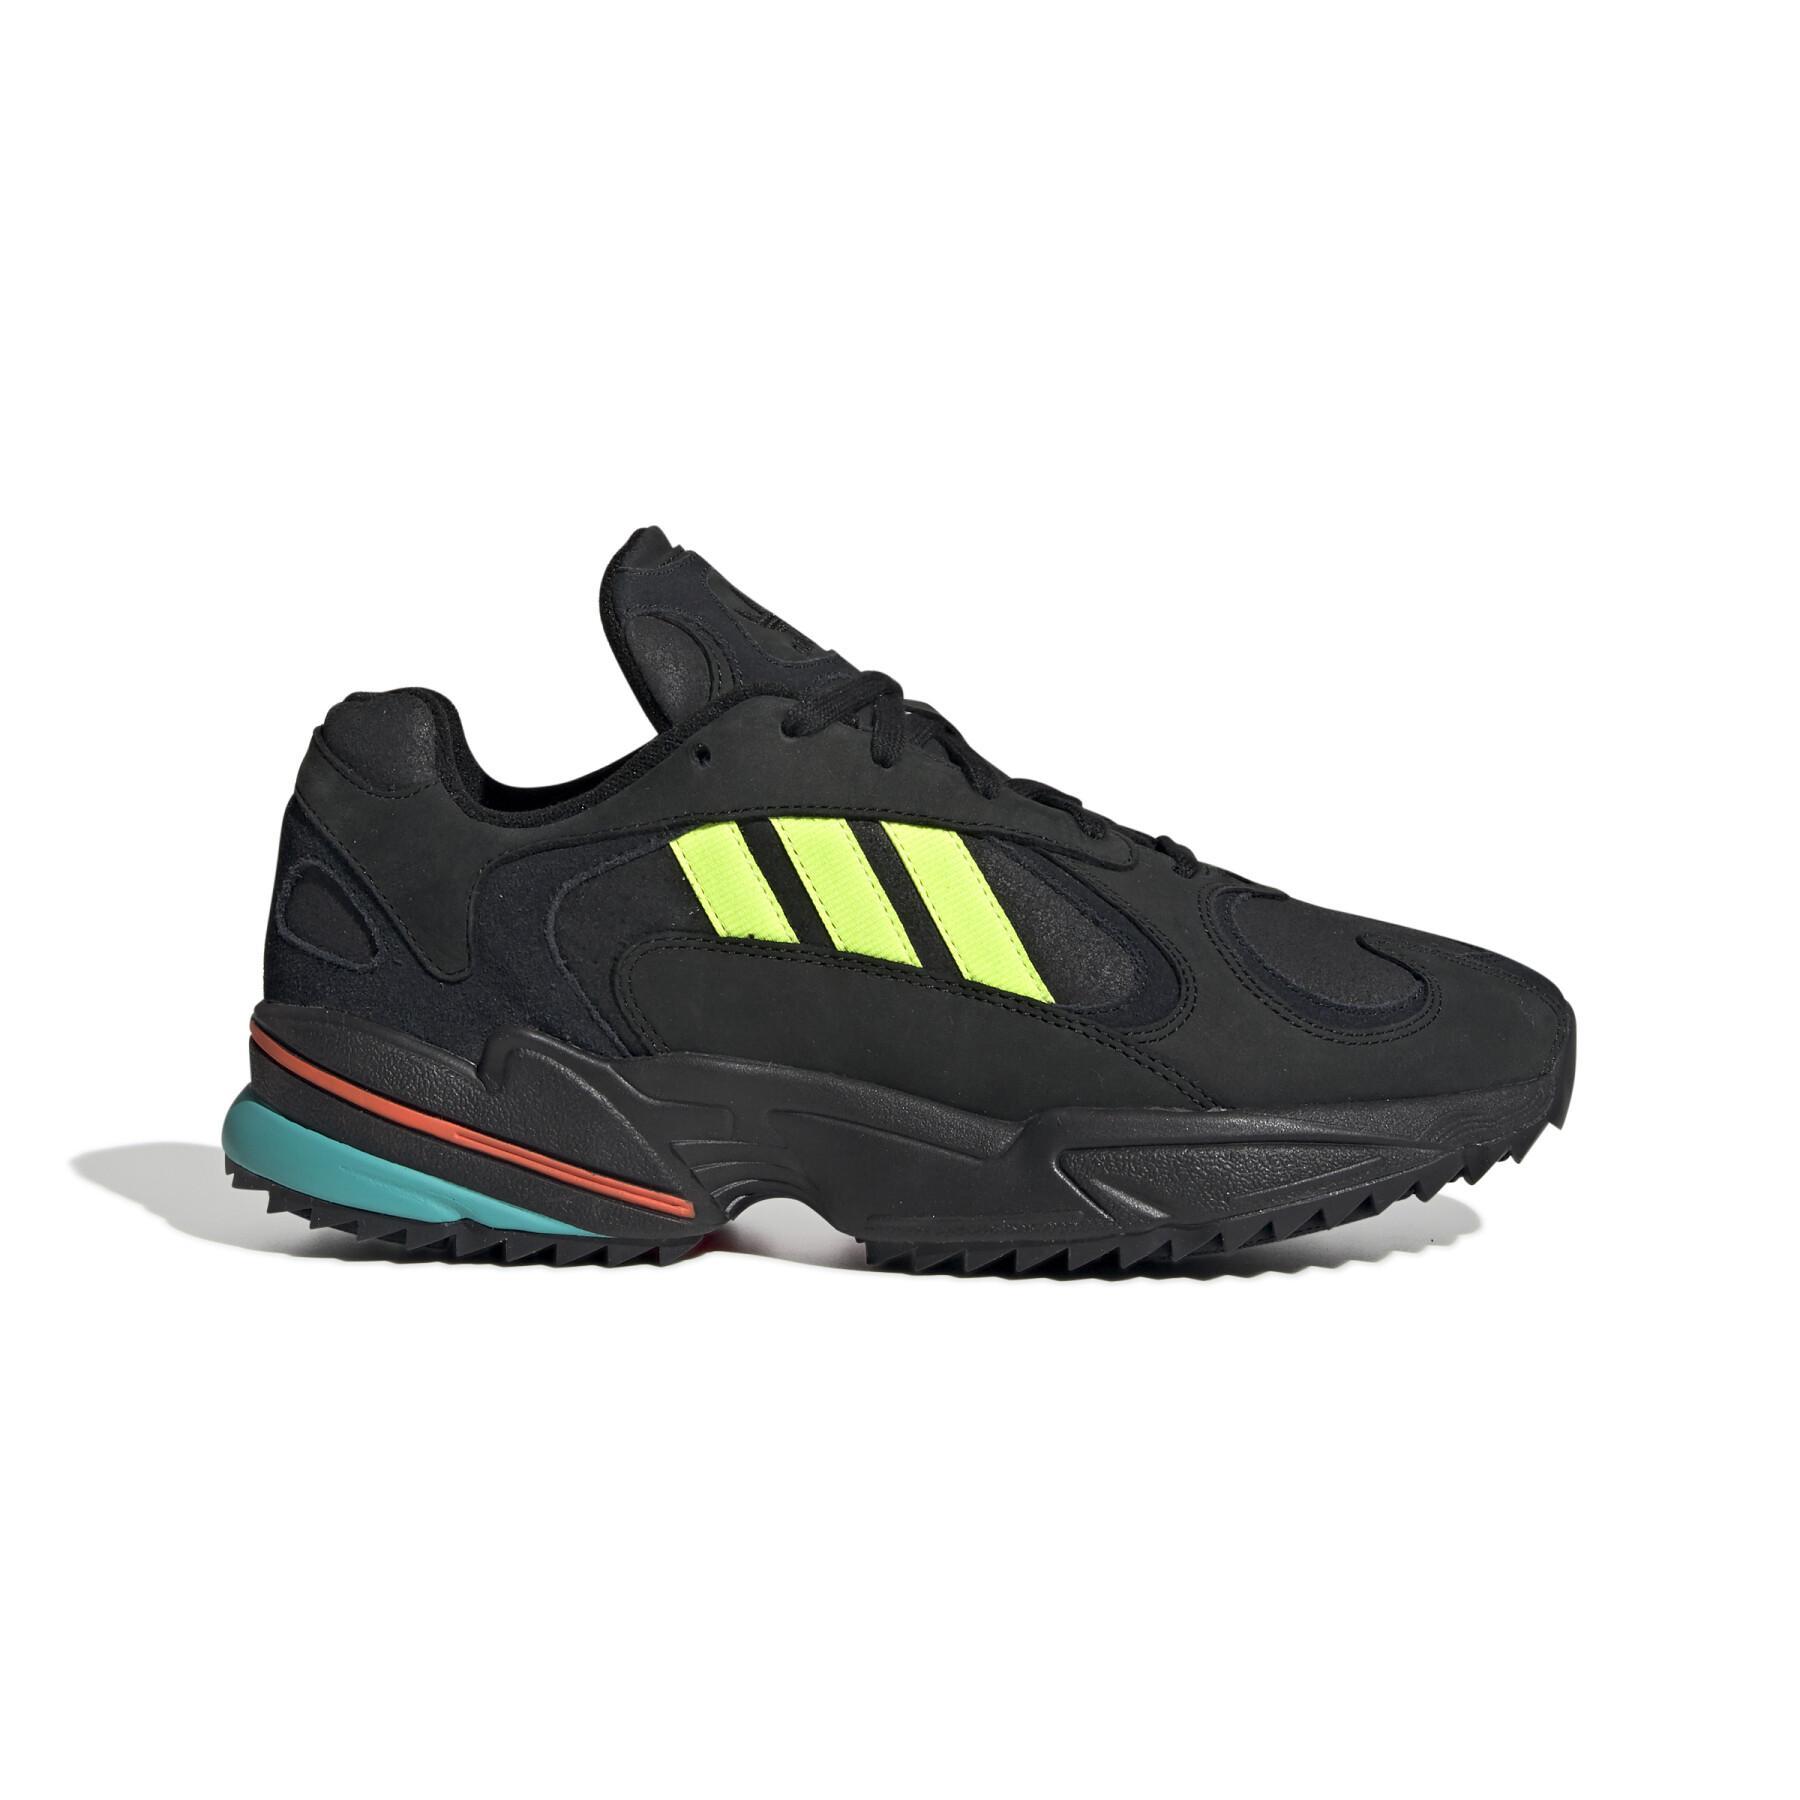 Sneakers adidas Trilha Yung-1